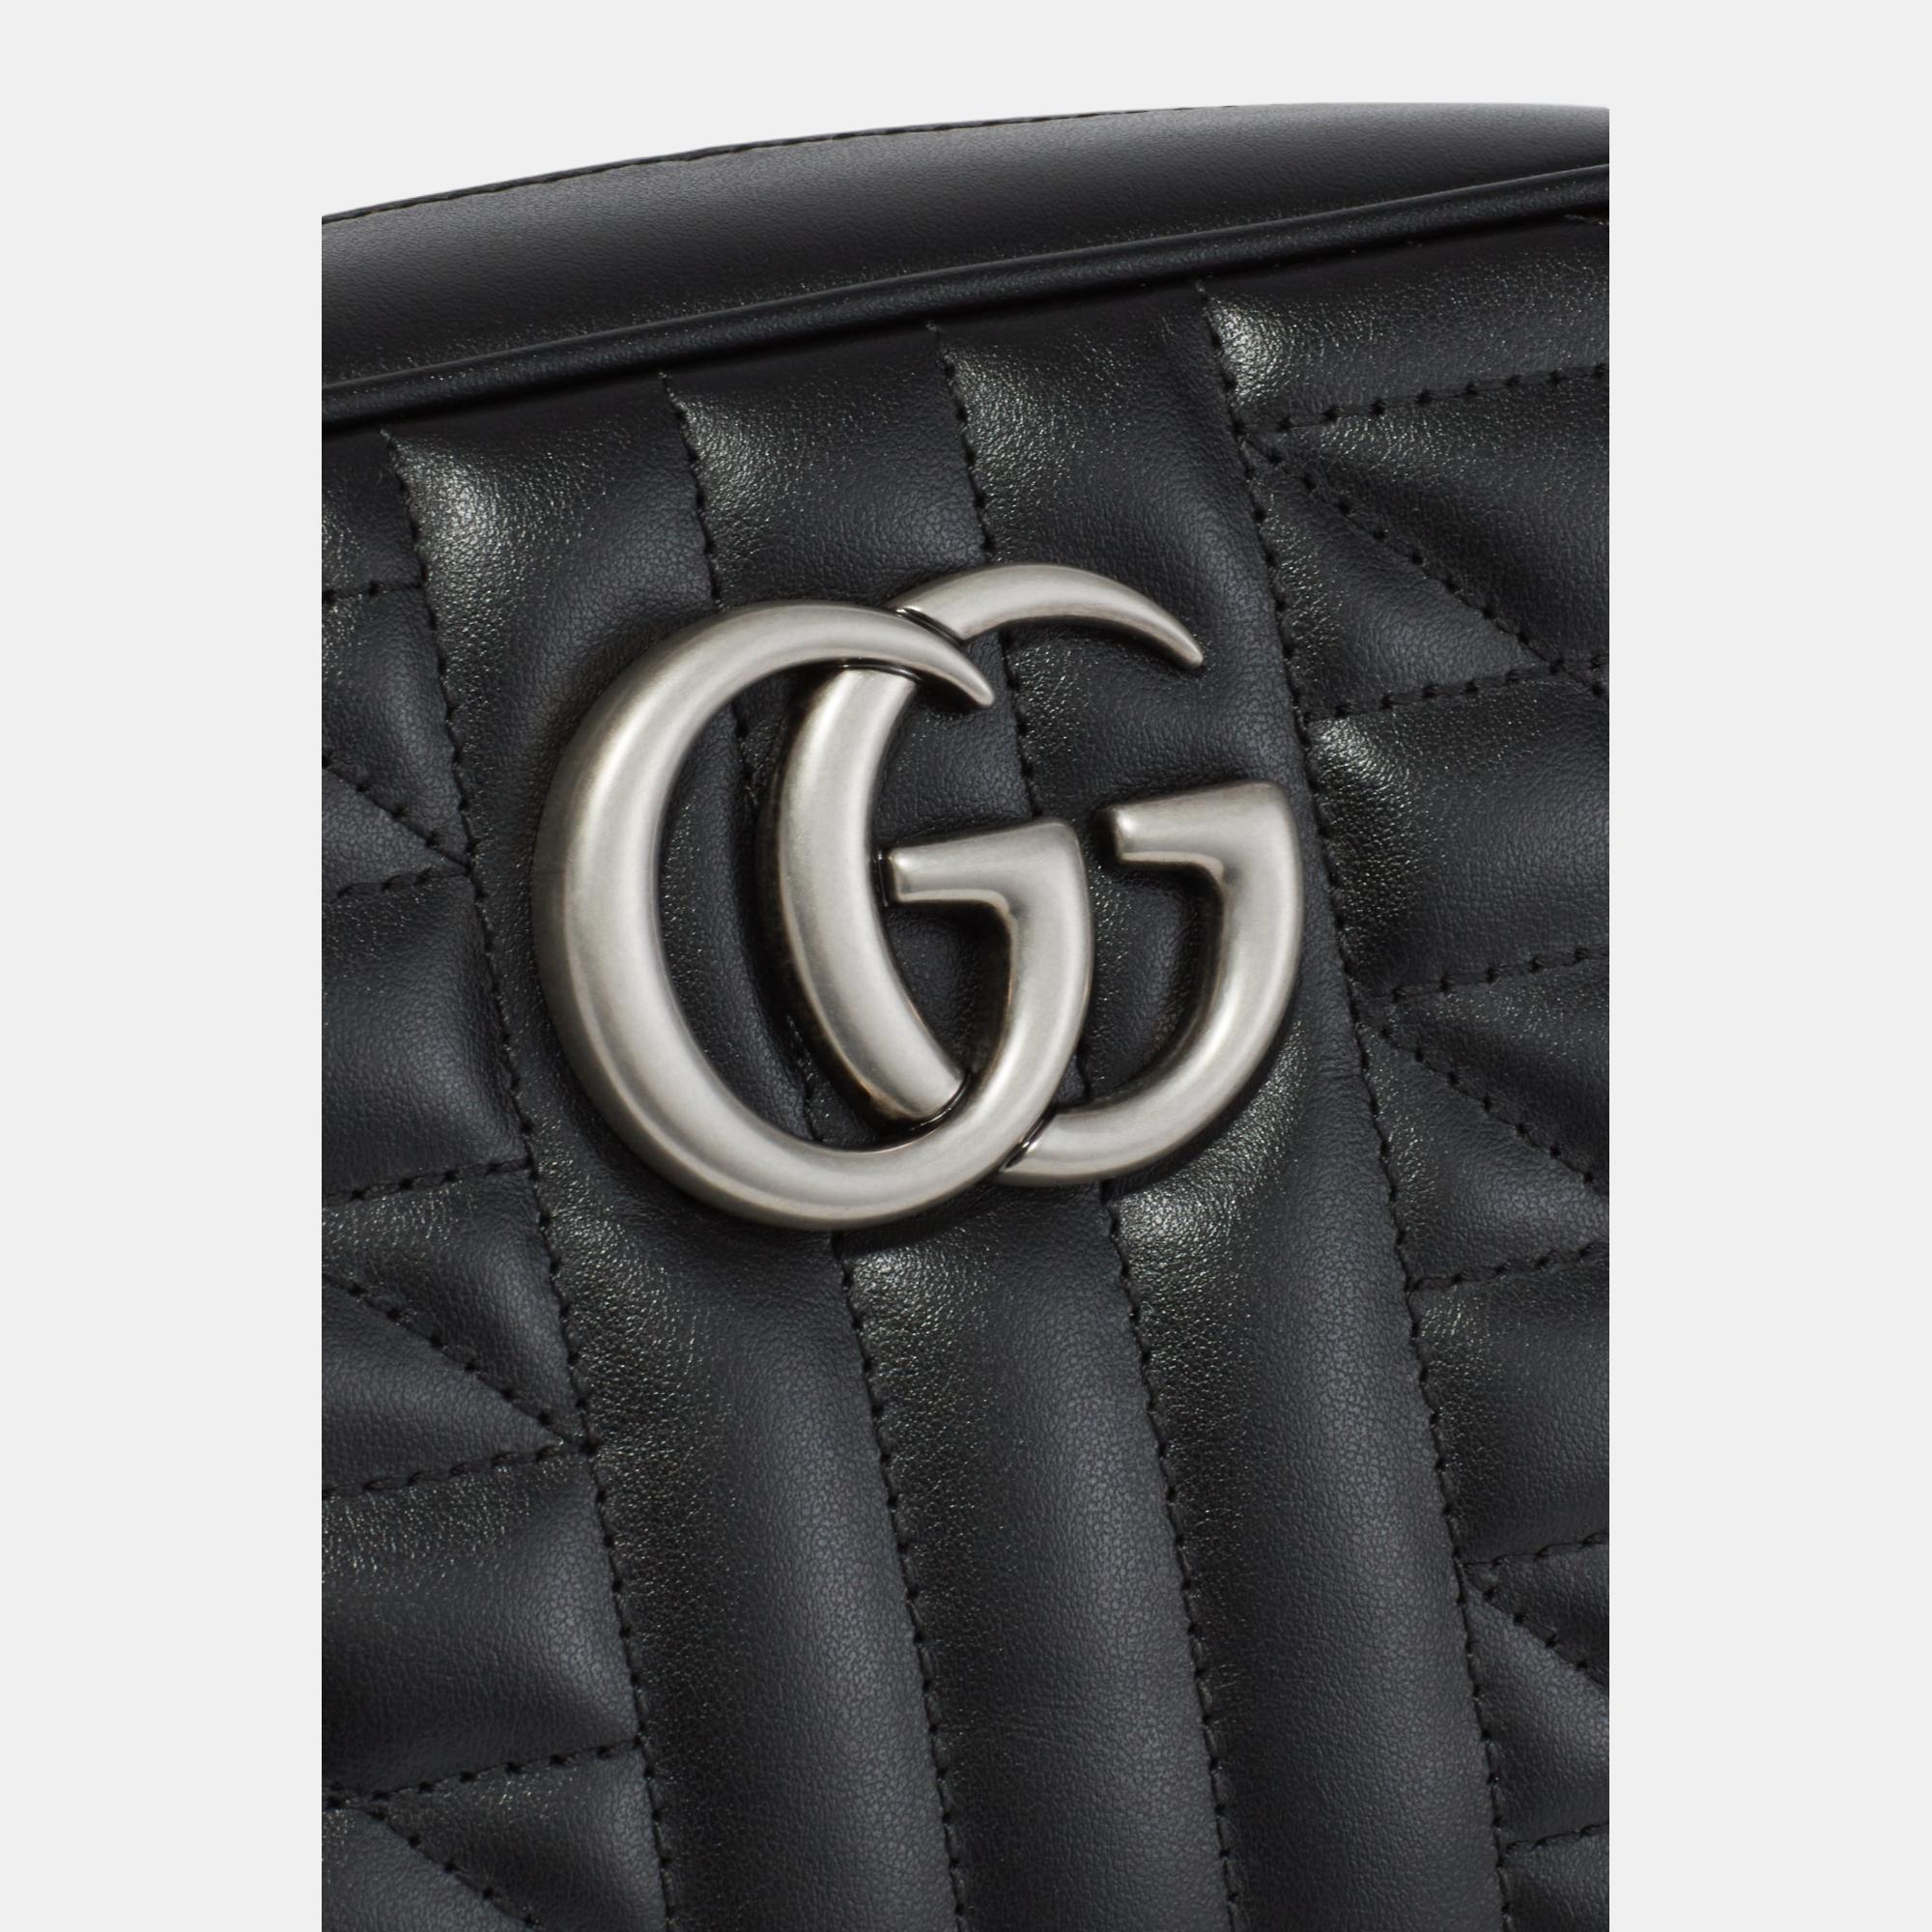 Gucci GG Marmont Small Quilted Camera Bag Antique Silver-toned Hardware